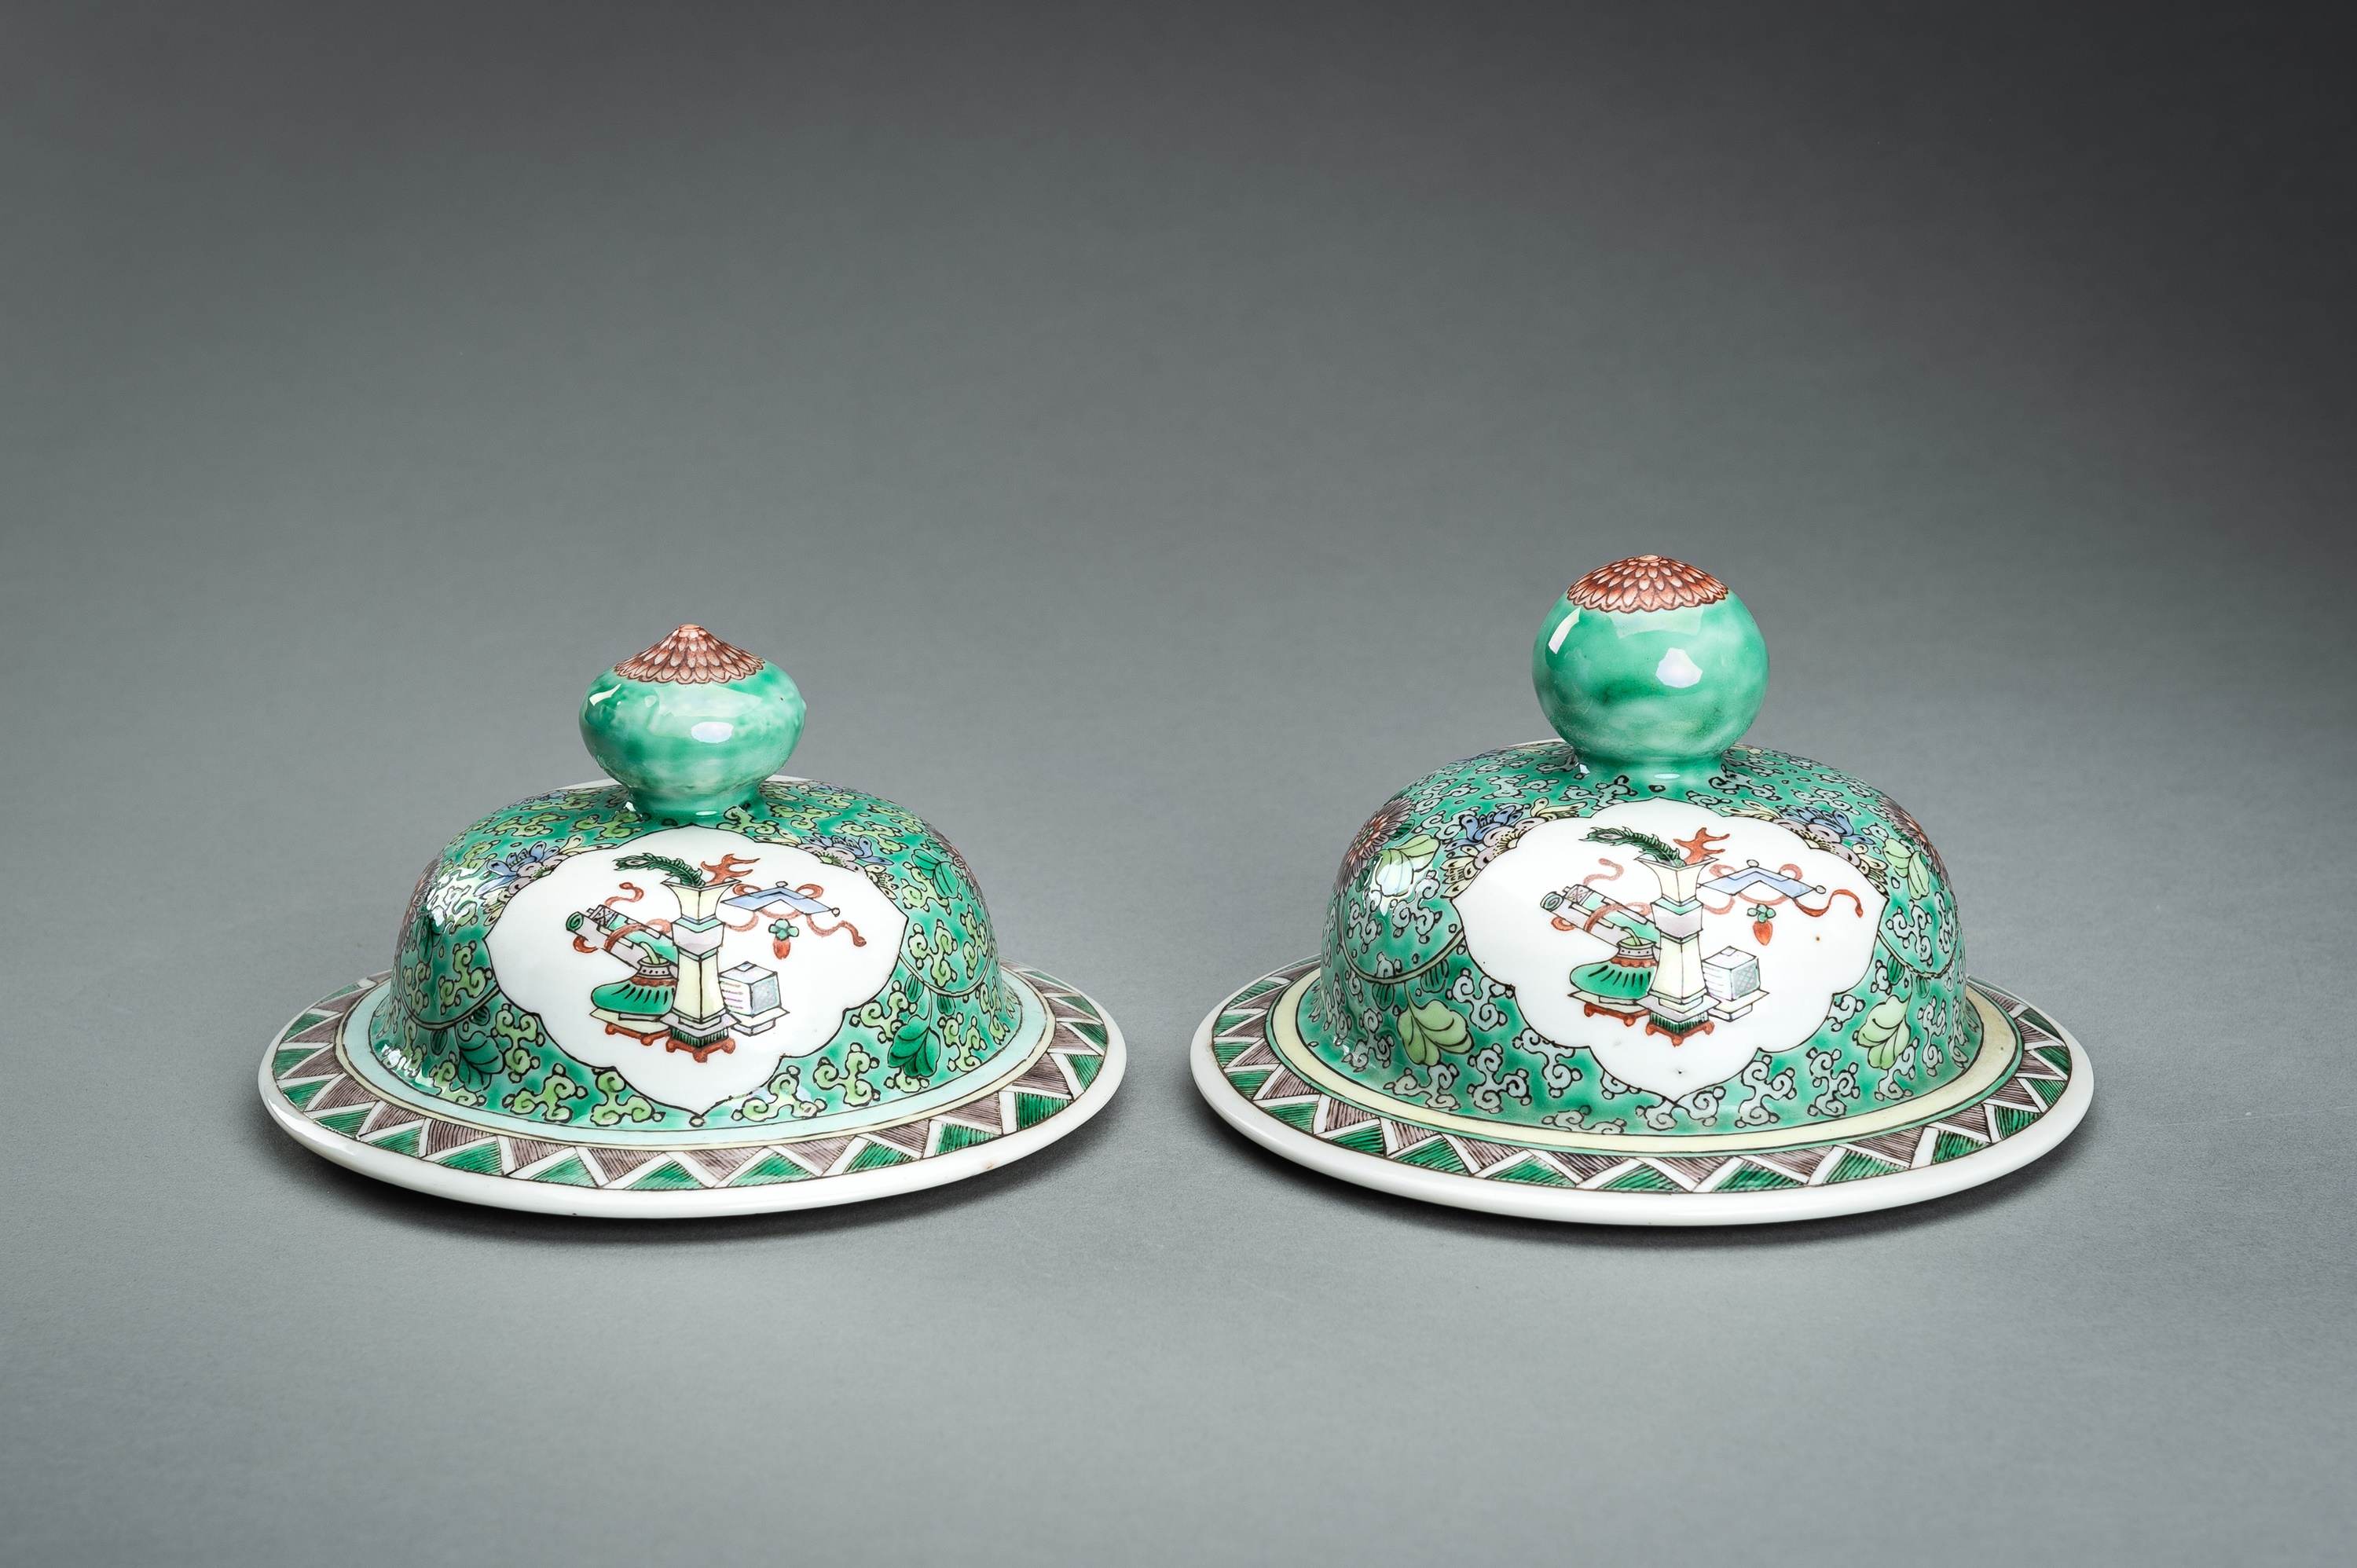 A LARGE PAIR OF FAMILLE VERTE PORCELAIN VASES WITH COVERS, 19th CENTURY - Image 16 of 24